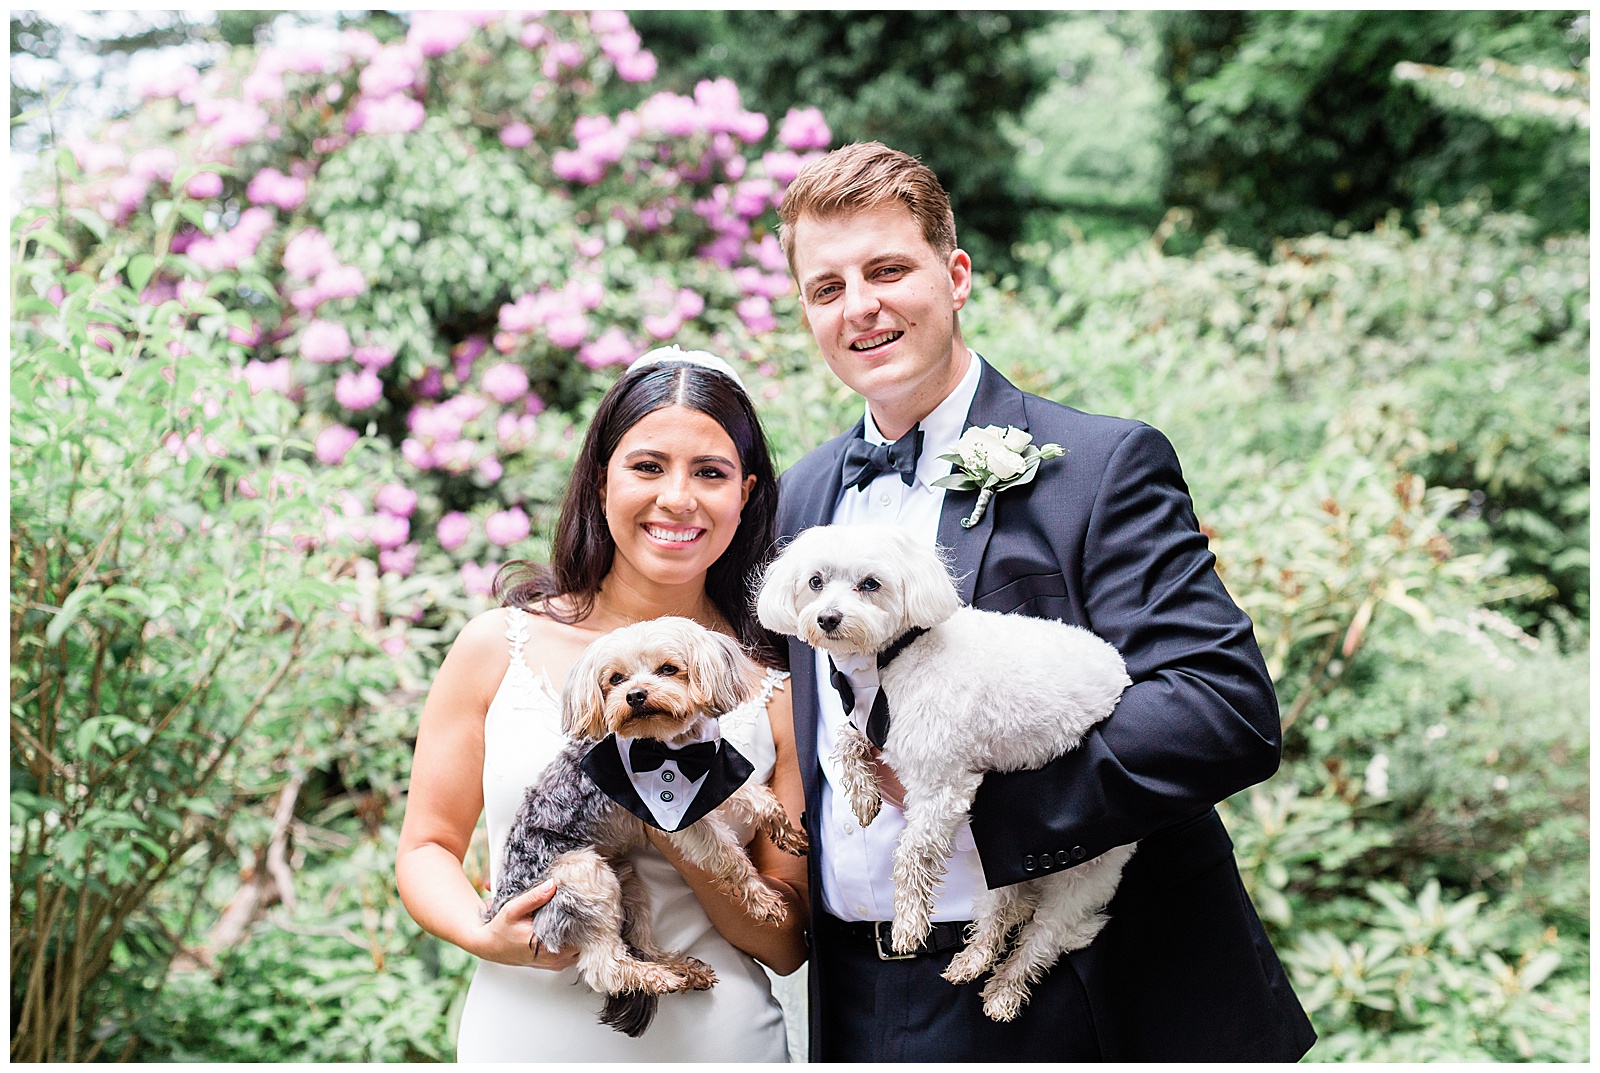 bride-and-groom-with-dogs-wedding-portrait-kristina-staal-photography-Roger-sherman-inn.jpg